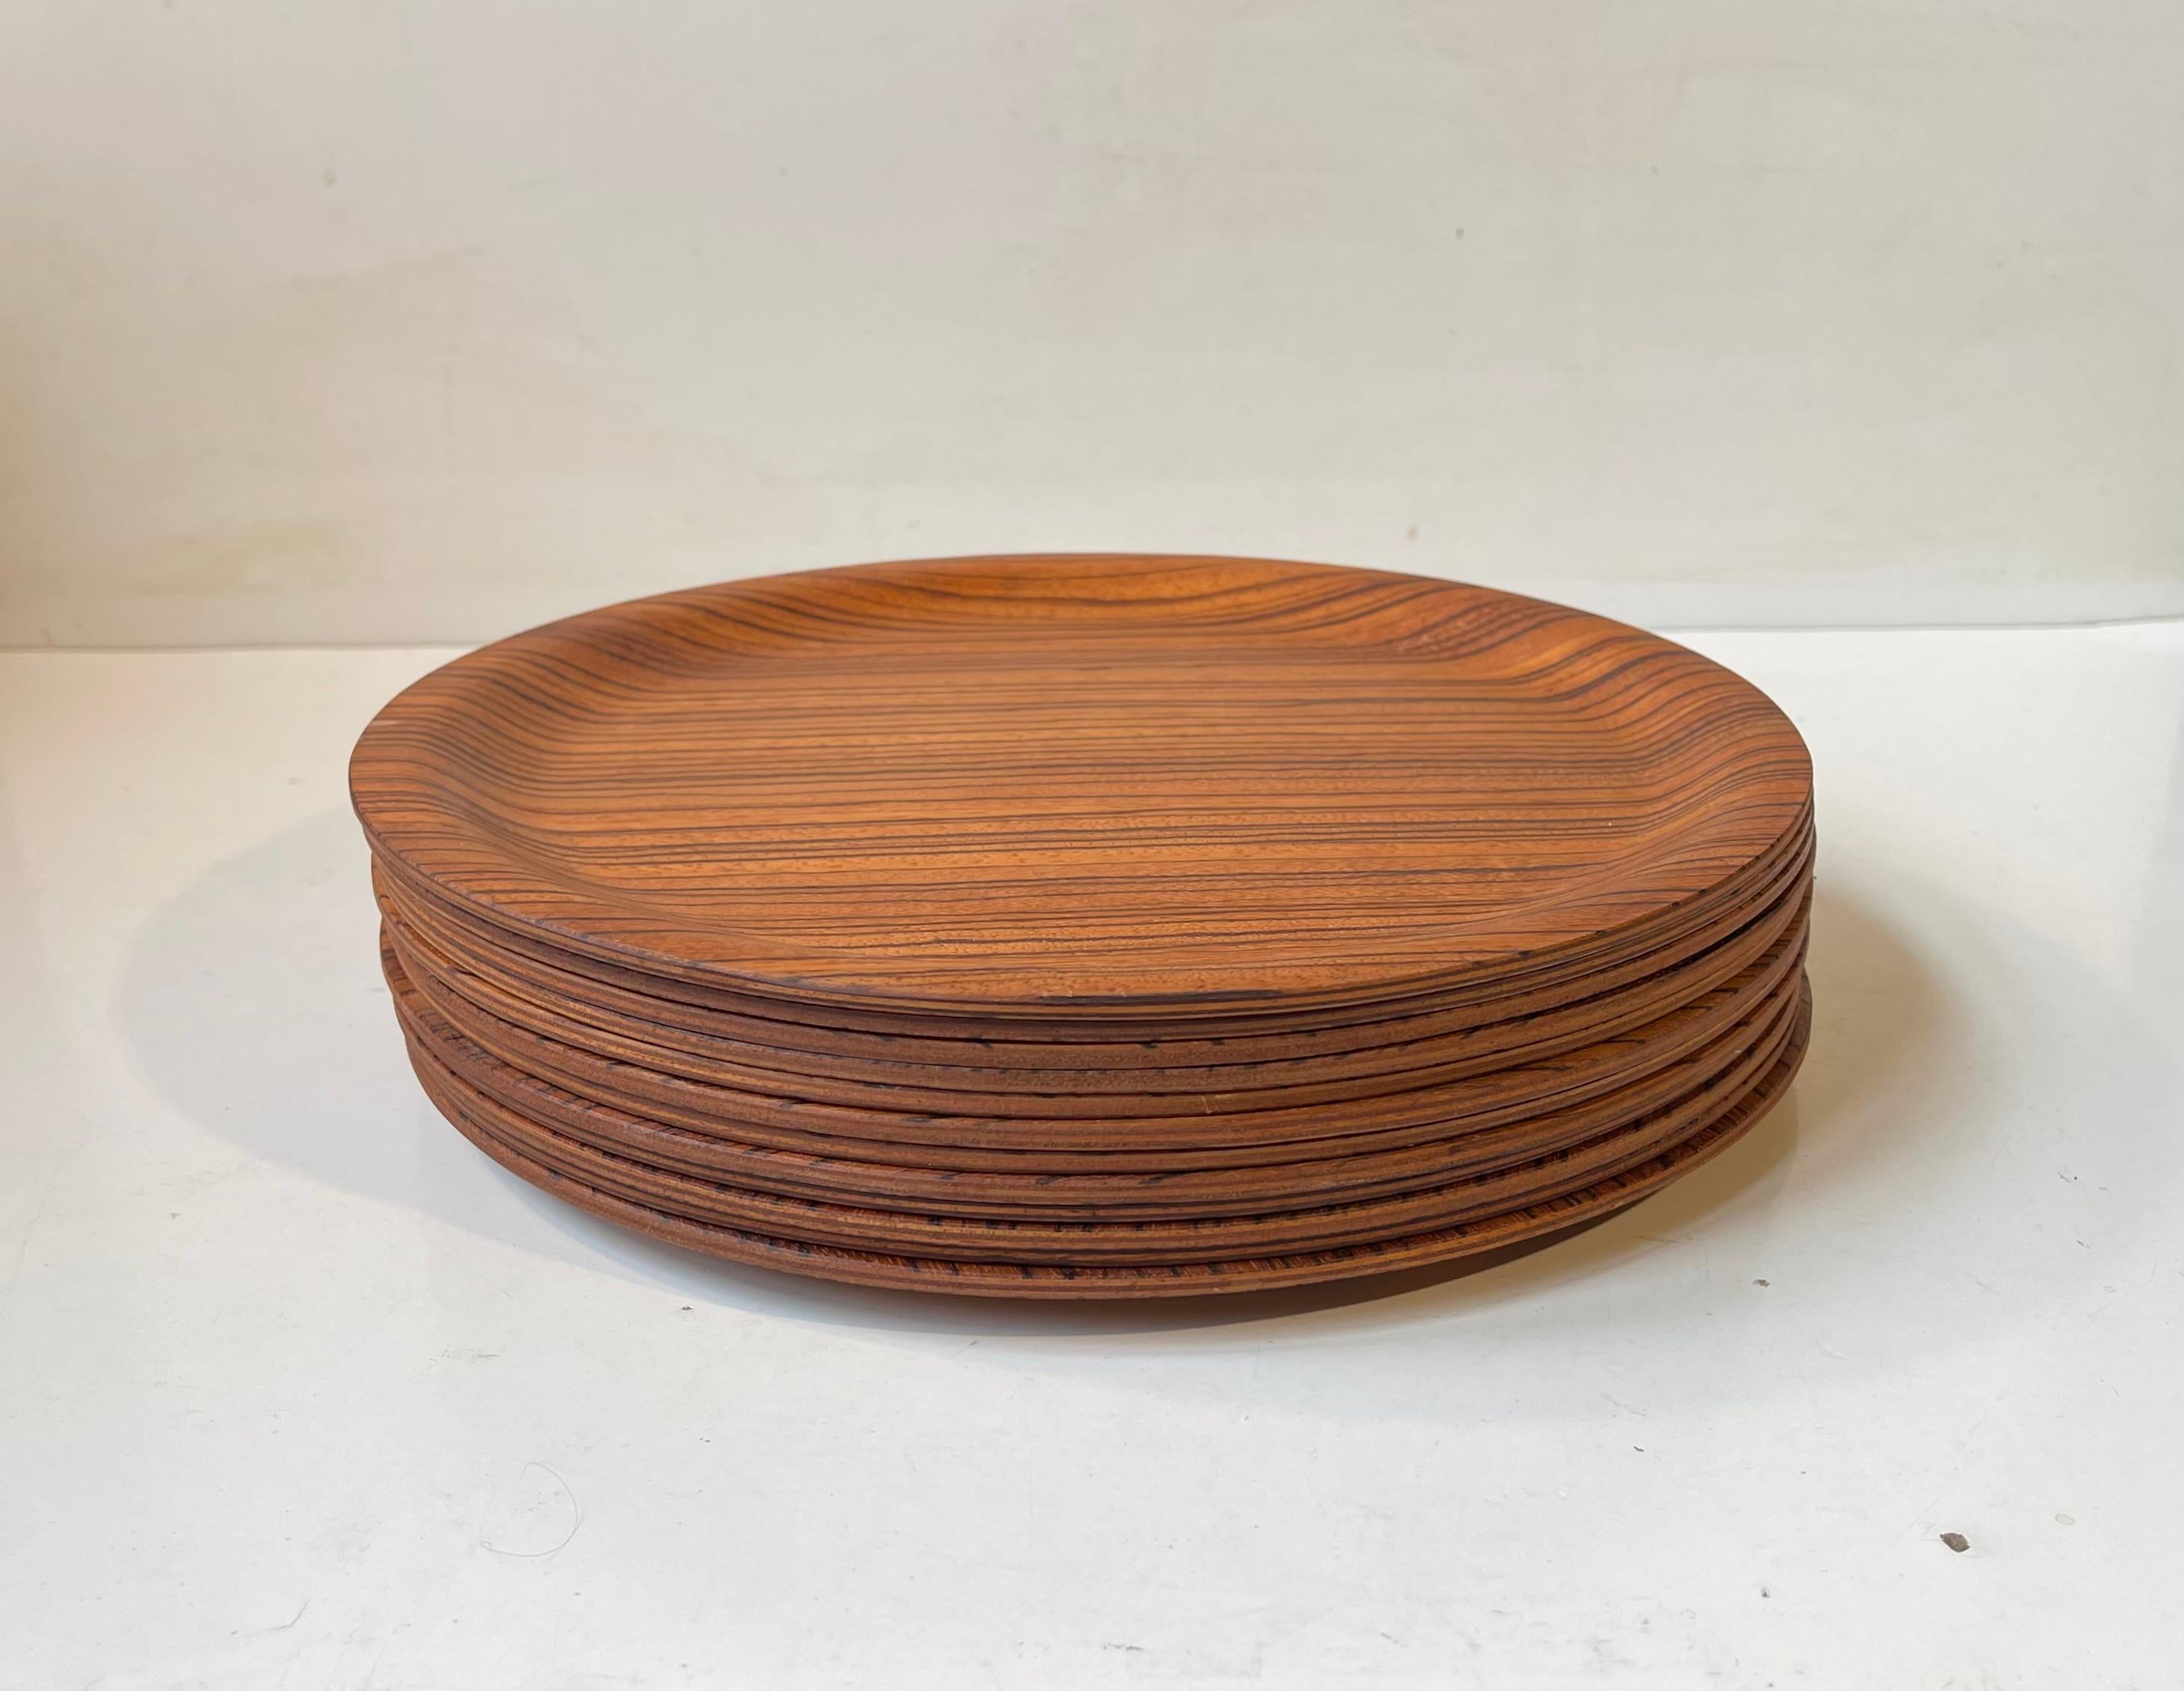 Mid-20th Century 12 Scandinavian Modern Plates in Zebrawood, 1960s For Sale